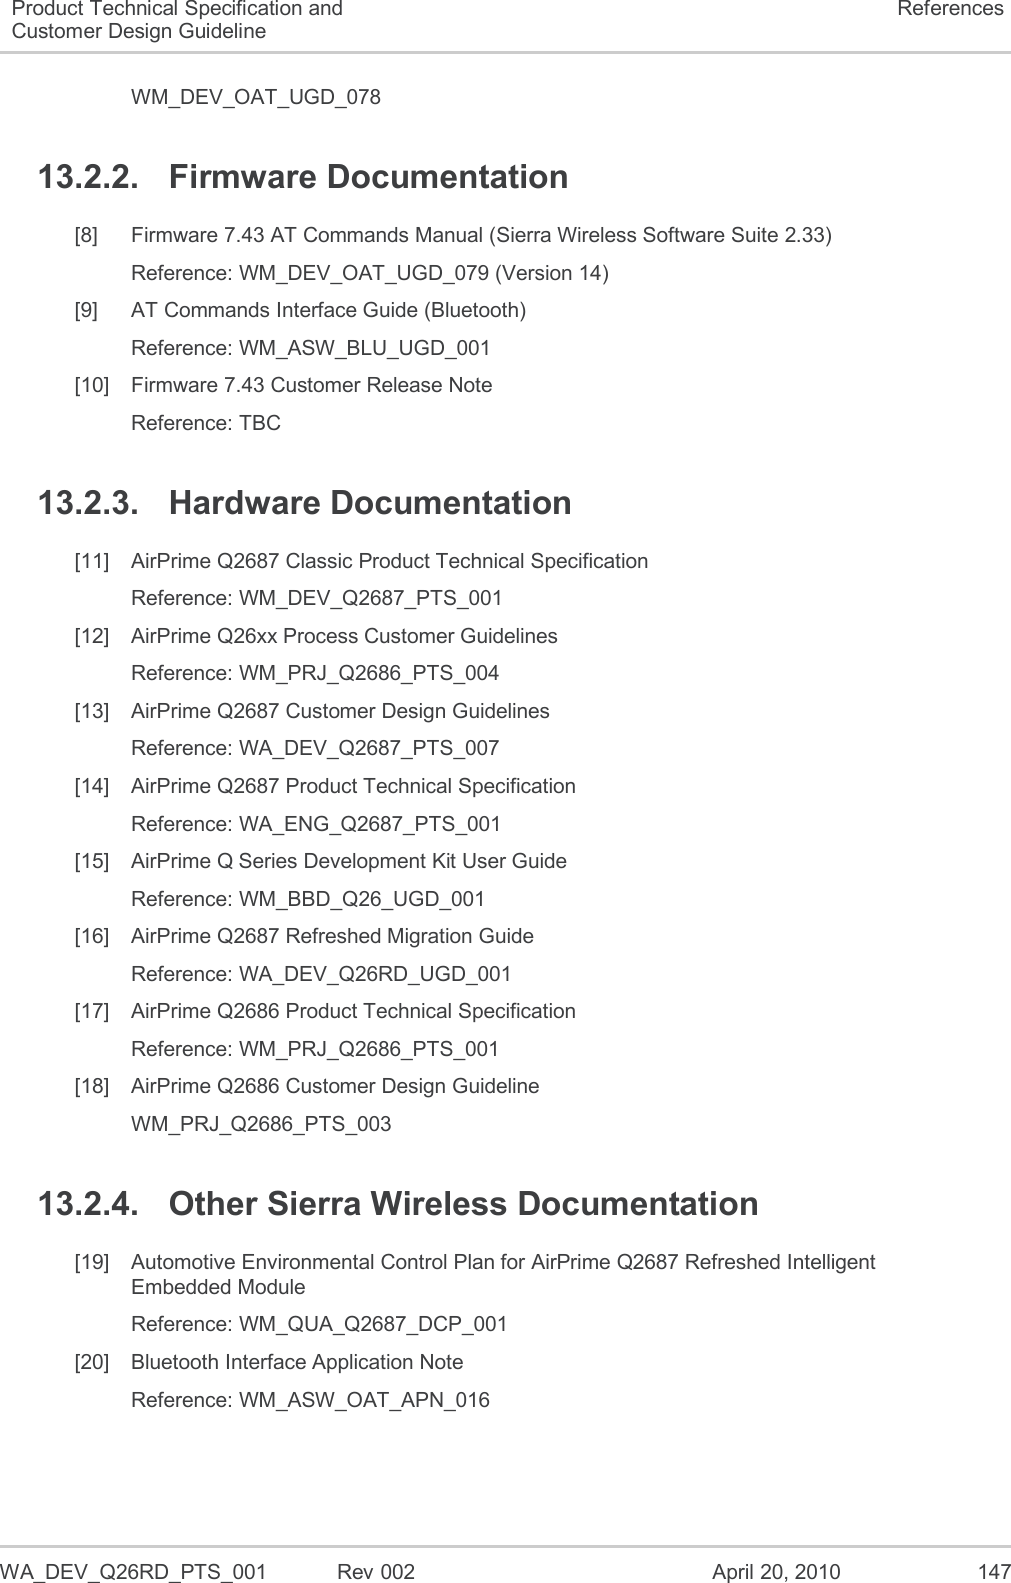   WA_DEV_Q26RD_PTS_001  Rev 002  April 20, 2010 147 Product Technical Specification and Customer Design Guideline References WM_DEV_OAT_UGD_078 13.2.2.  Firmware Documentation [8]  Firmware 7.43 AT Commands Manual (Sierra Wireless Software Suite 2.33) Reference: WM_DEV_OAT_UGD_079 (Version 14) [9]  AT Commands Interface Guide (Bluetooth) Reference: WM_ASW_BLU_UGD_001 [10]  Firmware 7.43 Customer Release Note Reference: TBC 13.2.3.  Hardware Documentation [11]  AirPrime Q2687 Classic Product Technical Specification Reference: WM_DEV_Q2687_PTS_001 [12]  AirPrime Q26xx Process Customer Guidelines Reference: WM_PRJ_Q2686_PTS_004 [13]  AirPrime Q2687 Customer Design Guidelines Reference: WA_DEV_Q2687_PTS_007 [14]  AirPrime Q2687 Product Technical Specification Reference: WA_ENG_Q2687_PTS_001 [15]  AirPrime Q Series Development Kit User Guide Reference: WM_BBD_Q26_UGD_001 [16]  AirPrime Q2687 Refreshed Migration Guide Reference: WA_DEV_Q26RD_UGD_001 [17]  AirPrime Q2686 Product Technical Specification Reference: WM_PRJ_Q2686_PTS_001 [18]  AirPrime Q2686 Customer Design Guideline WM_PRJ_Q2686_PTS_003 13.2.4.  Other Sierra Wireless Documentation [19]  Automotive Environmental Control Plan for AirPrime Q2687 Refreshed Intelligent Embedded Module Reference: WM_QUA_Q2687_DCP_001 [20]  Bluetooth Interface Application Note  Reference: WM_ASW_OAT_APN_016 